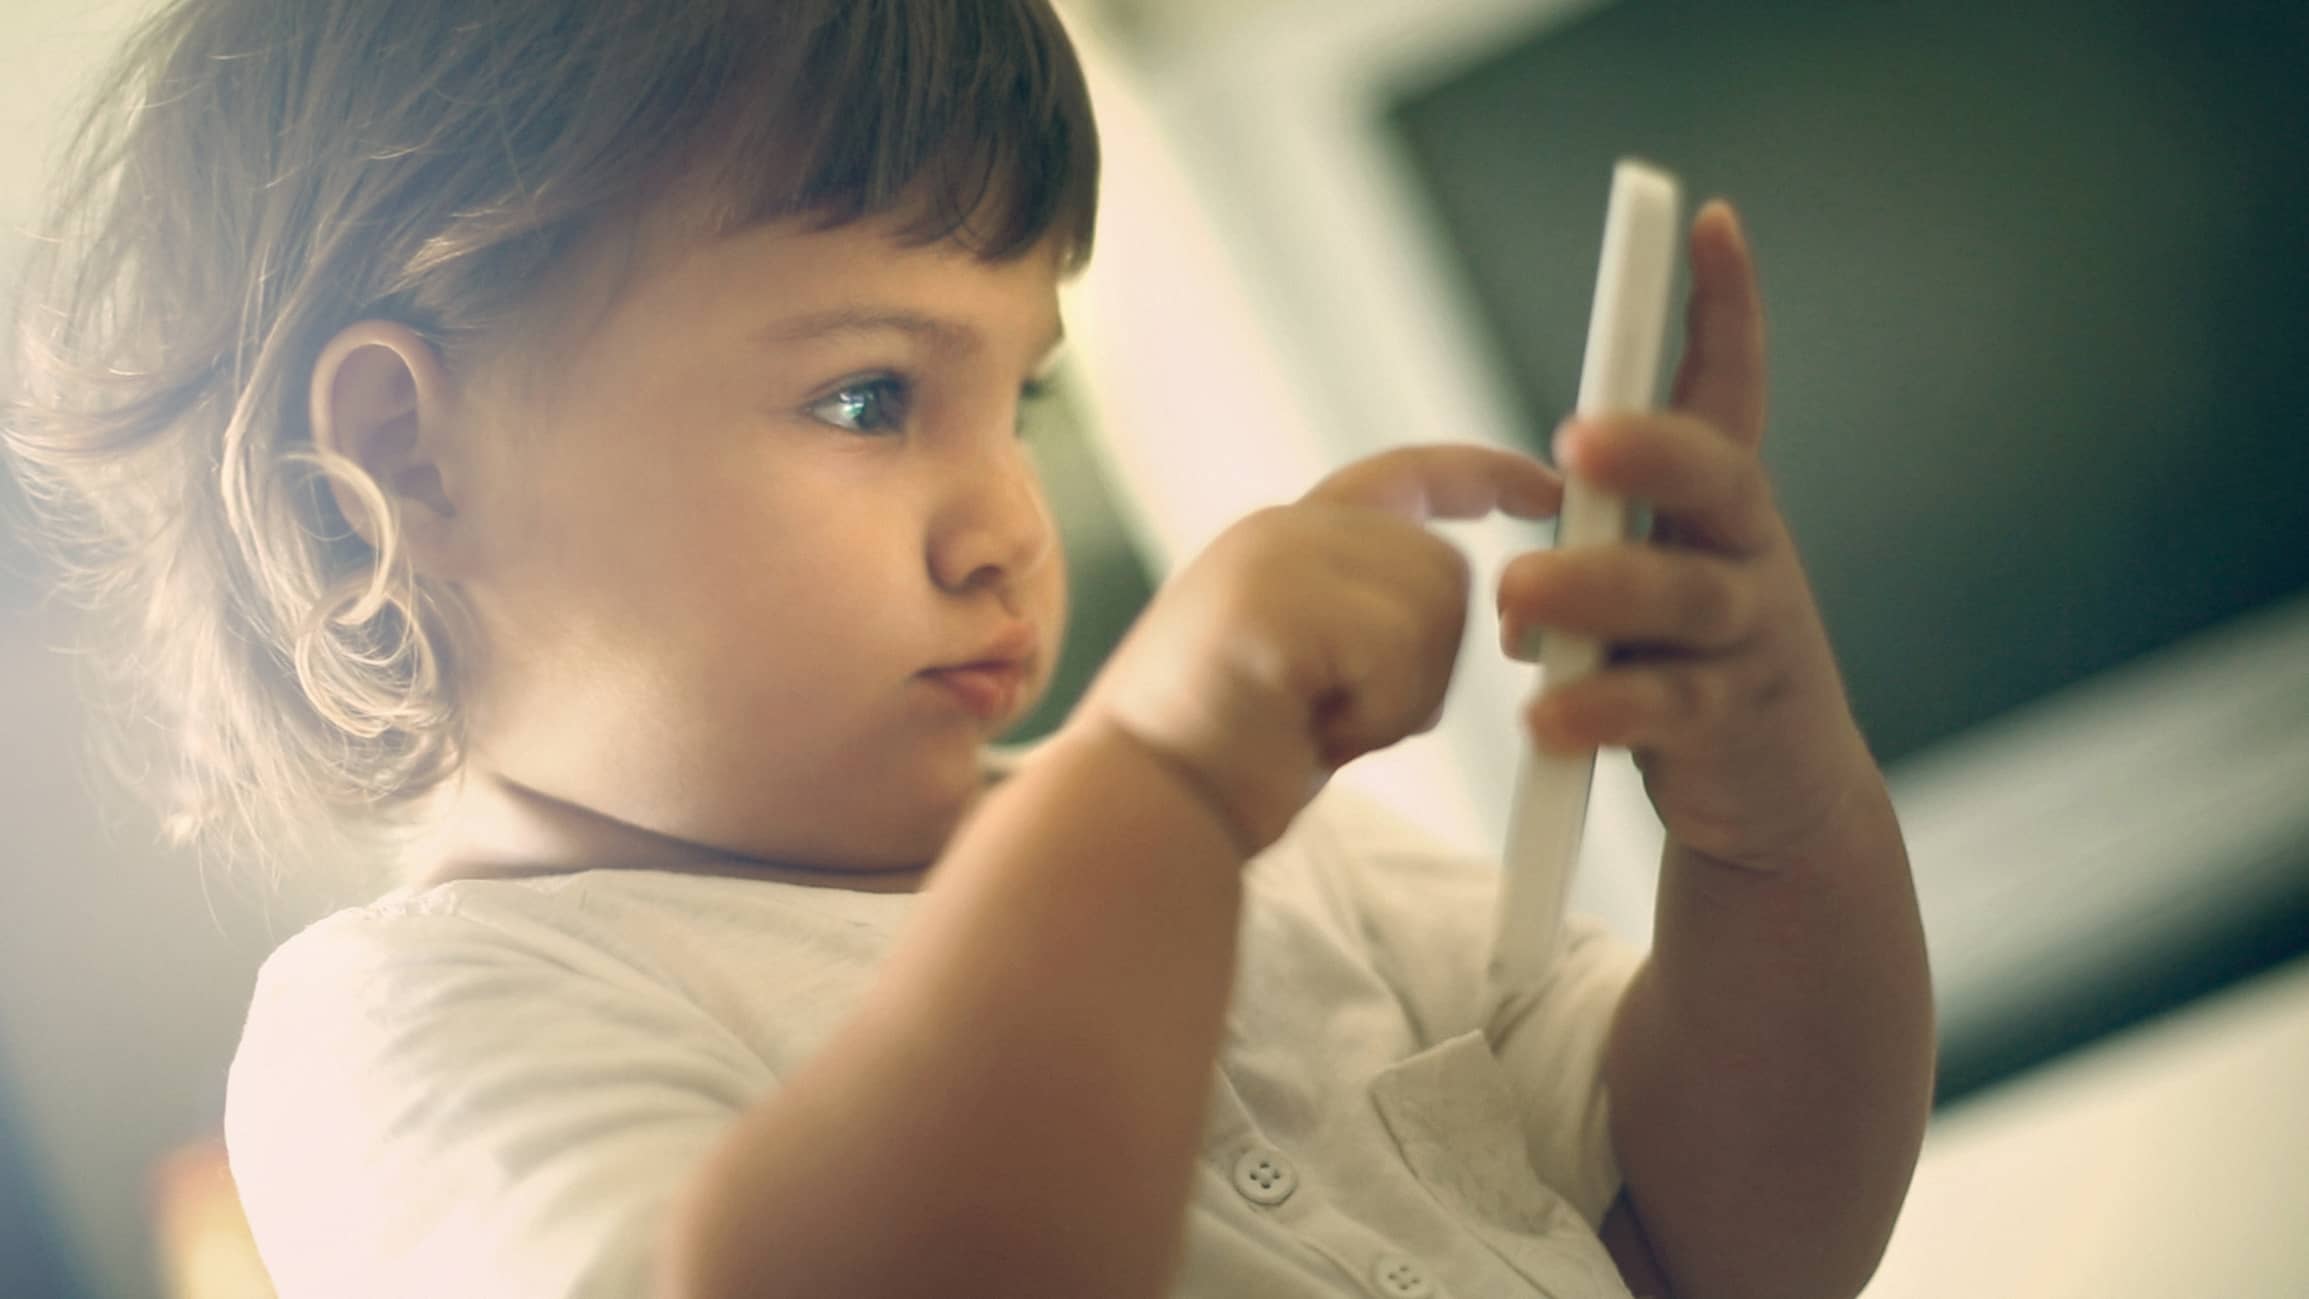 Toddler on a smartphone; do you know appropriate screen limits?